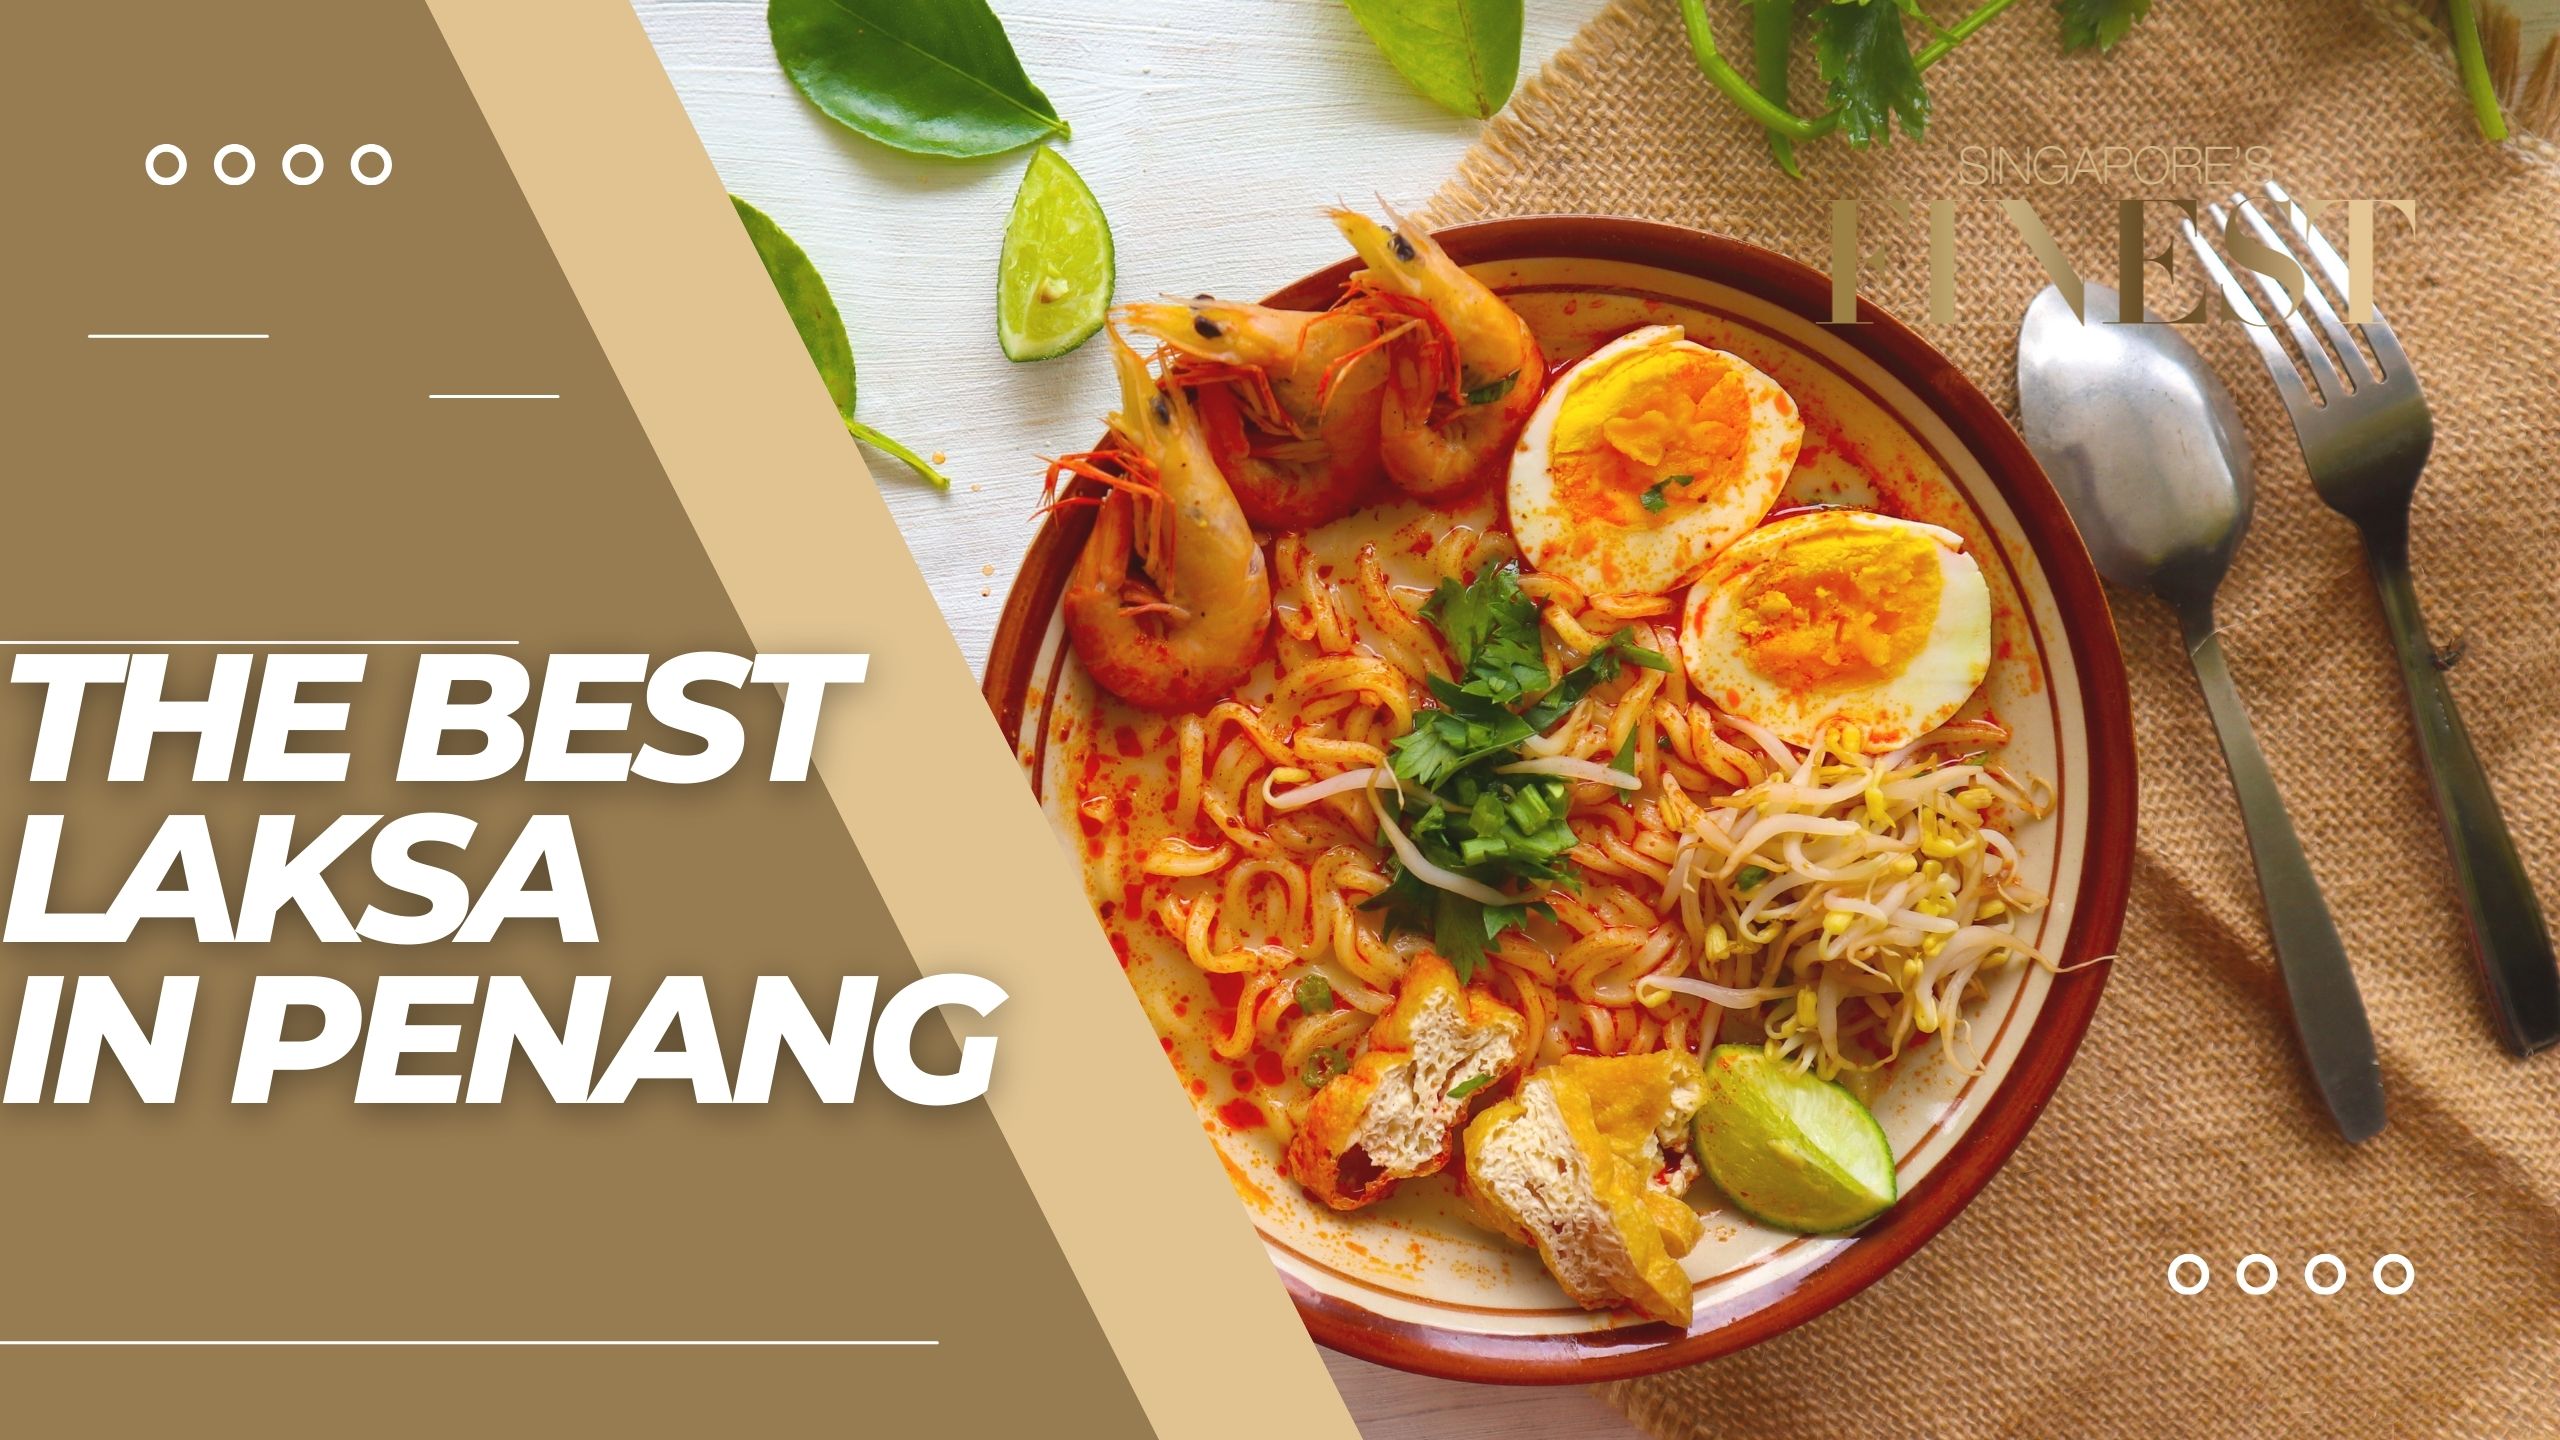 The Finest Laksa in Penang